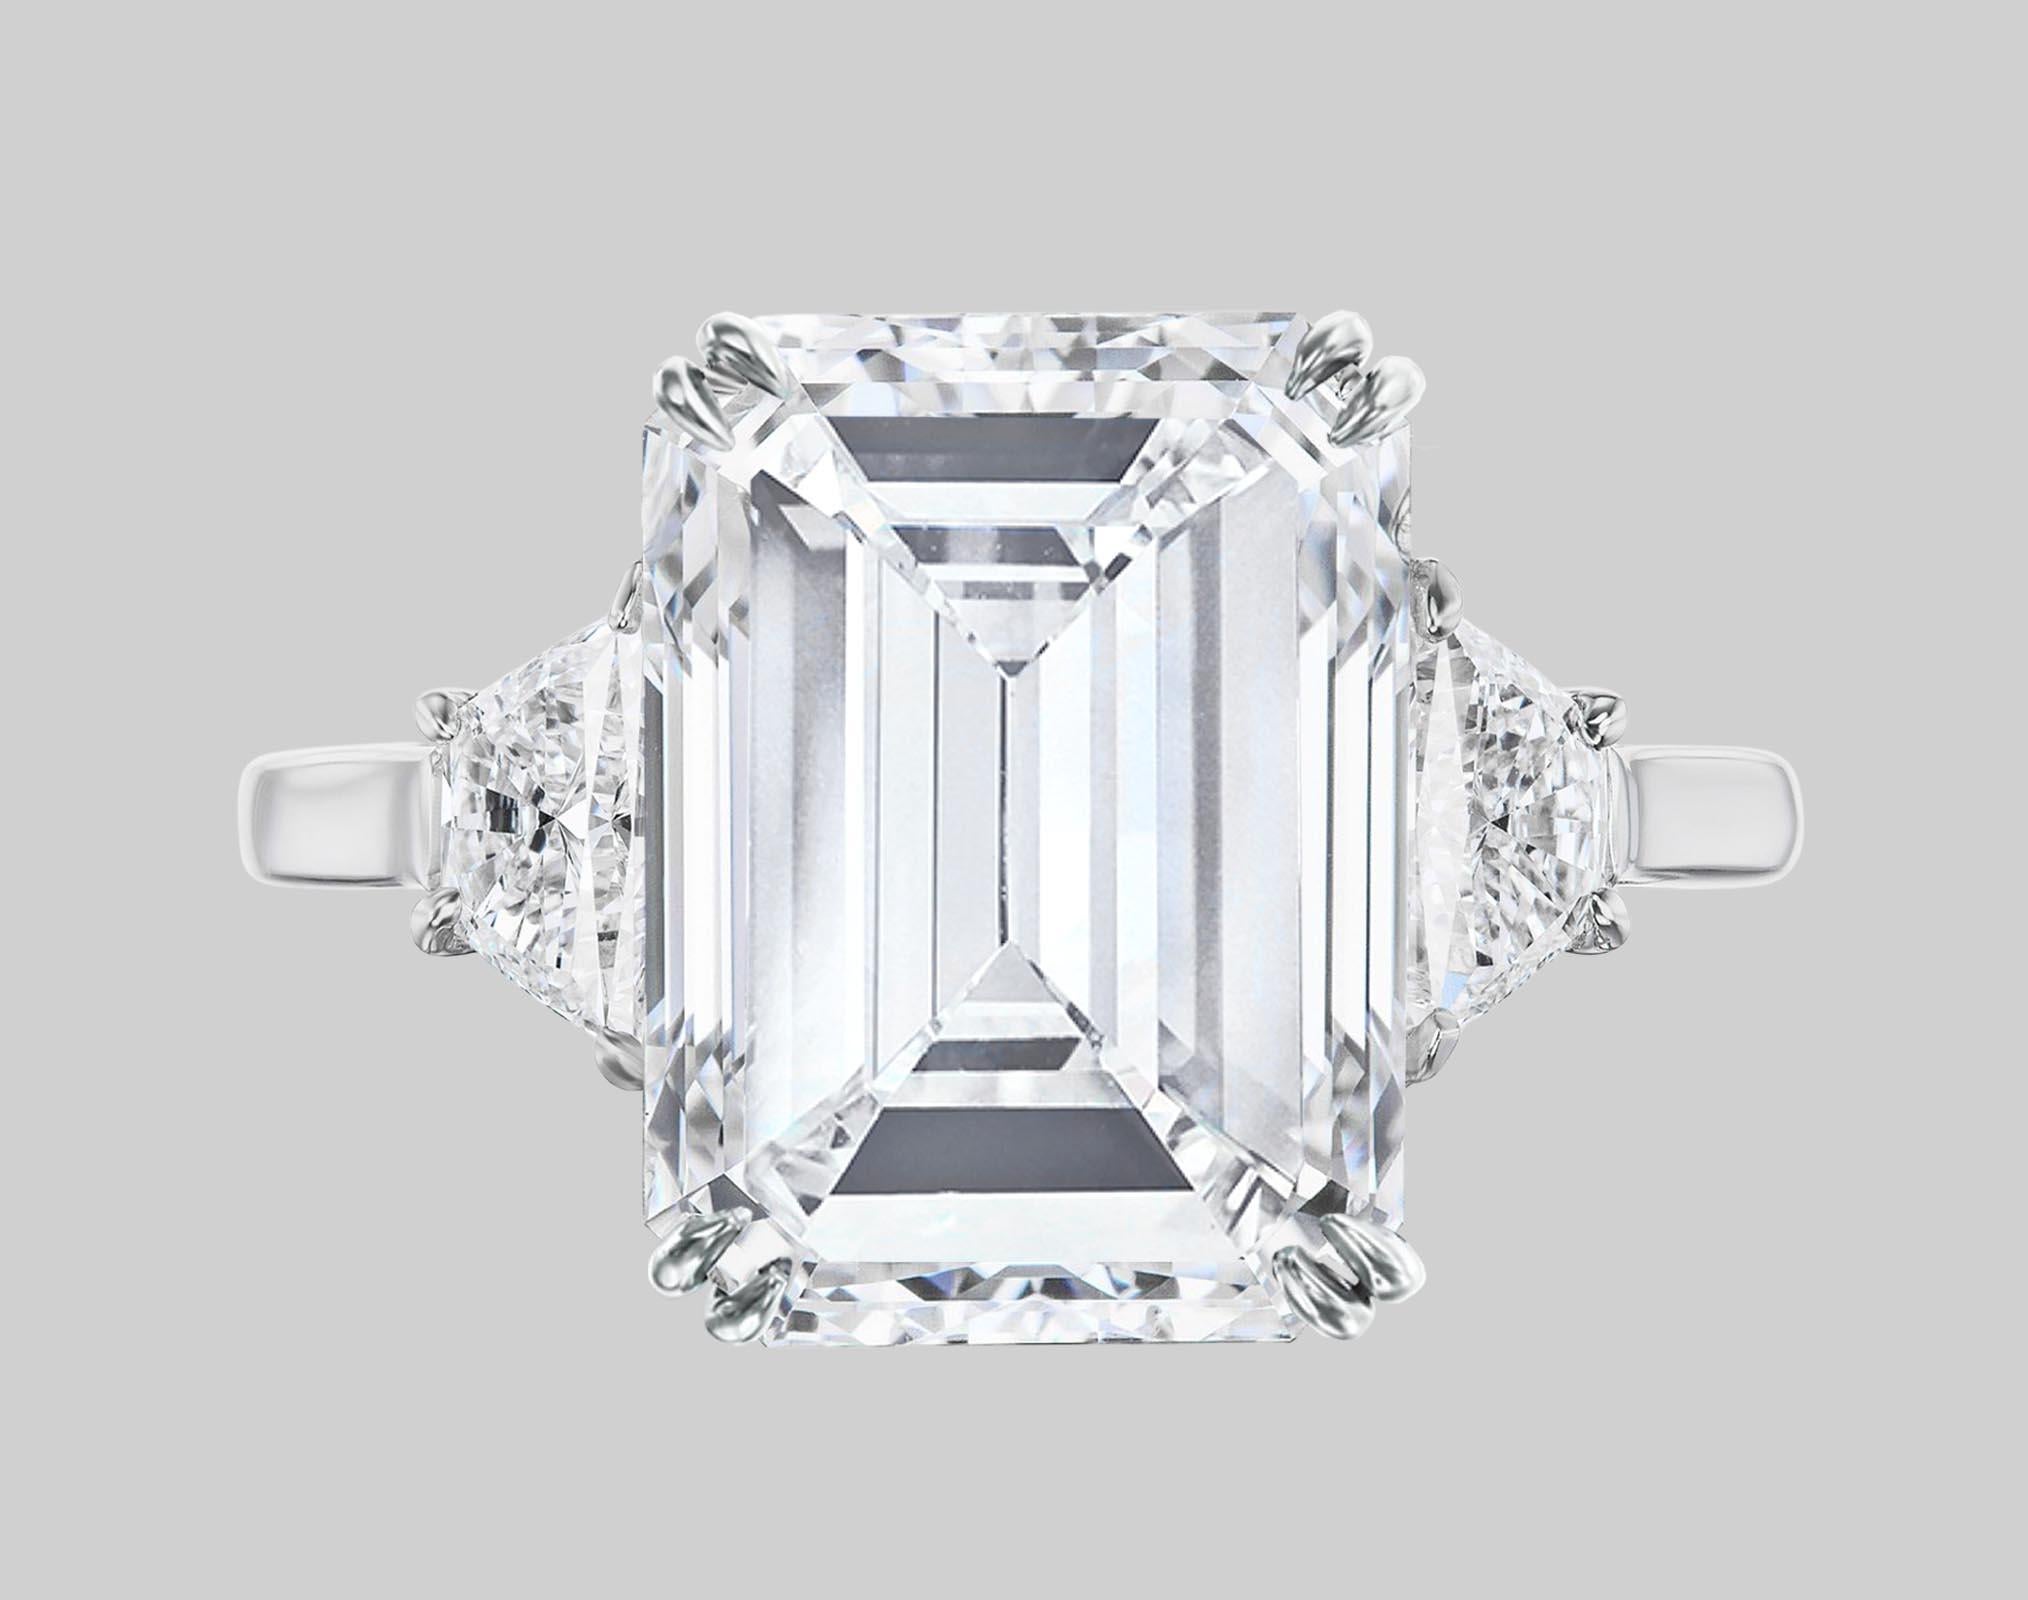 This exquisite ring is the epitome of timeless elegance and precision craftsmanship. At its heart lies a breathtaking 3 carat emerald-cut diamond, boasting an E color grade that exudes a pure and icy brilliance. The stone's VVS2 clarity ensures that